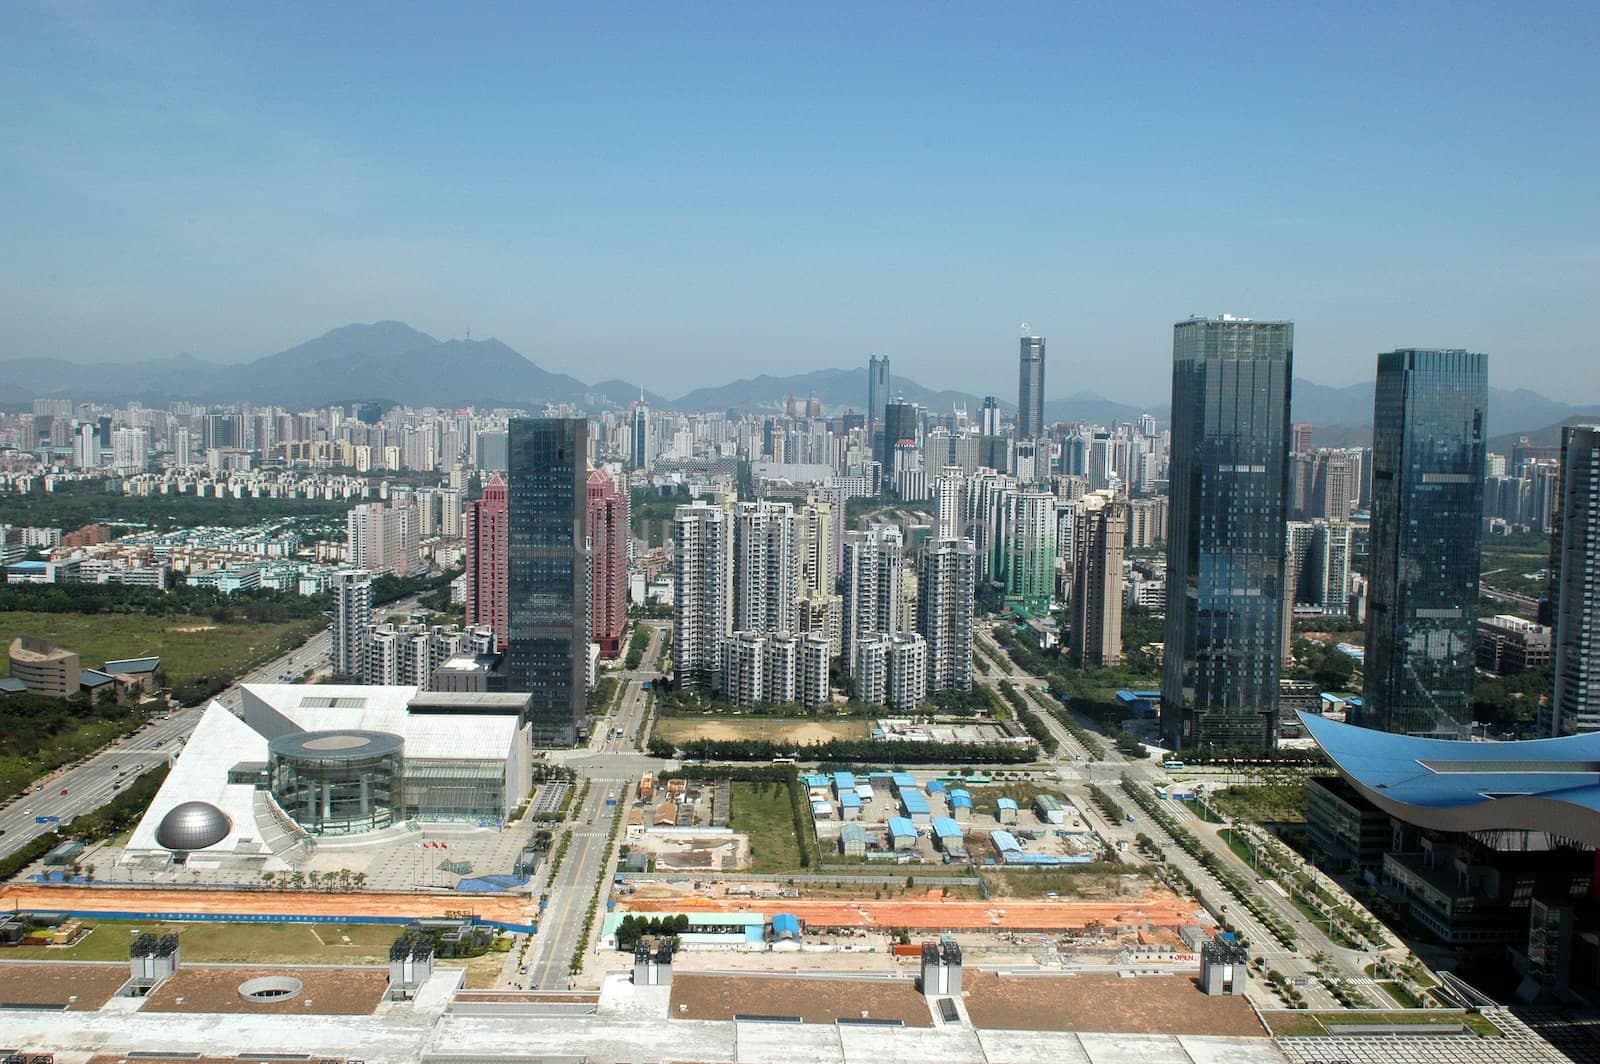 China, Guangdong province, modern, prosperous Shenzhen city. General, aerial view from high building. New office skyscrapers, shops and hotels in Futian district.